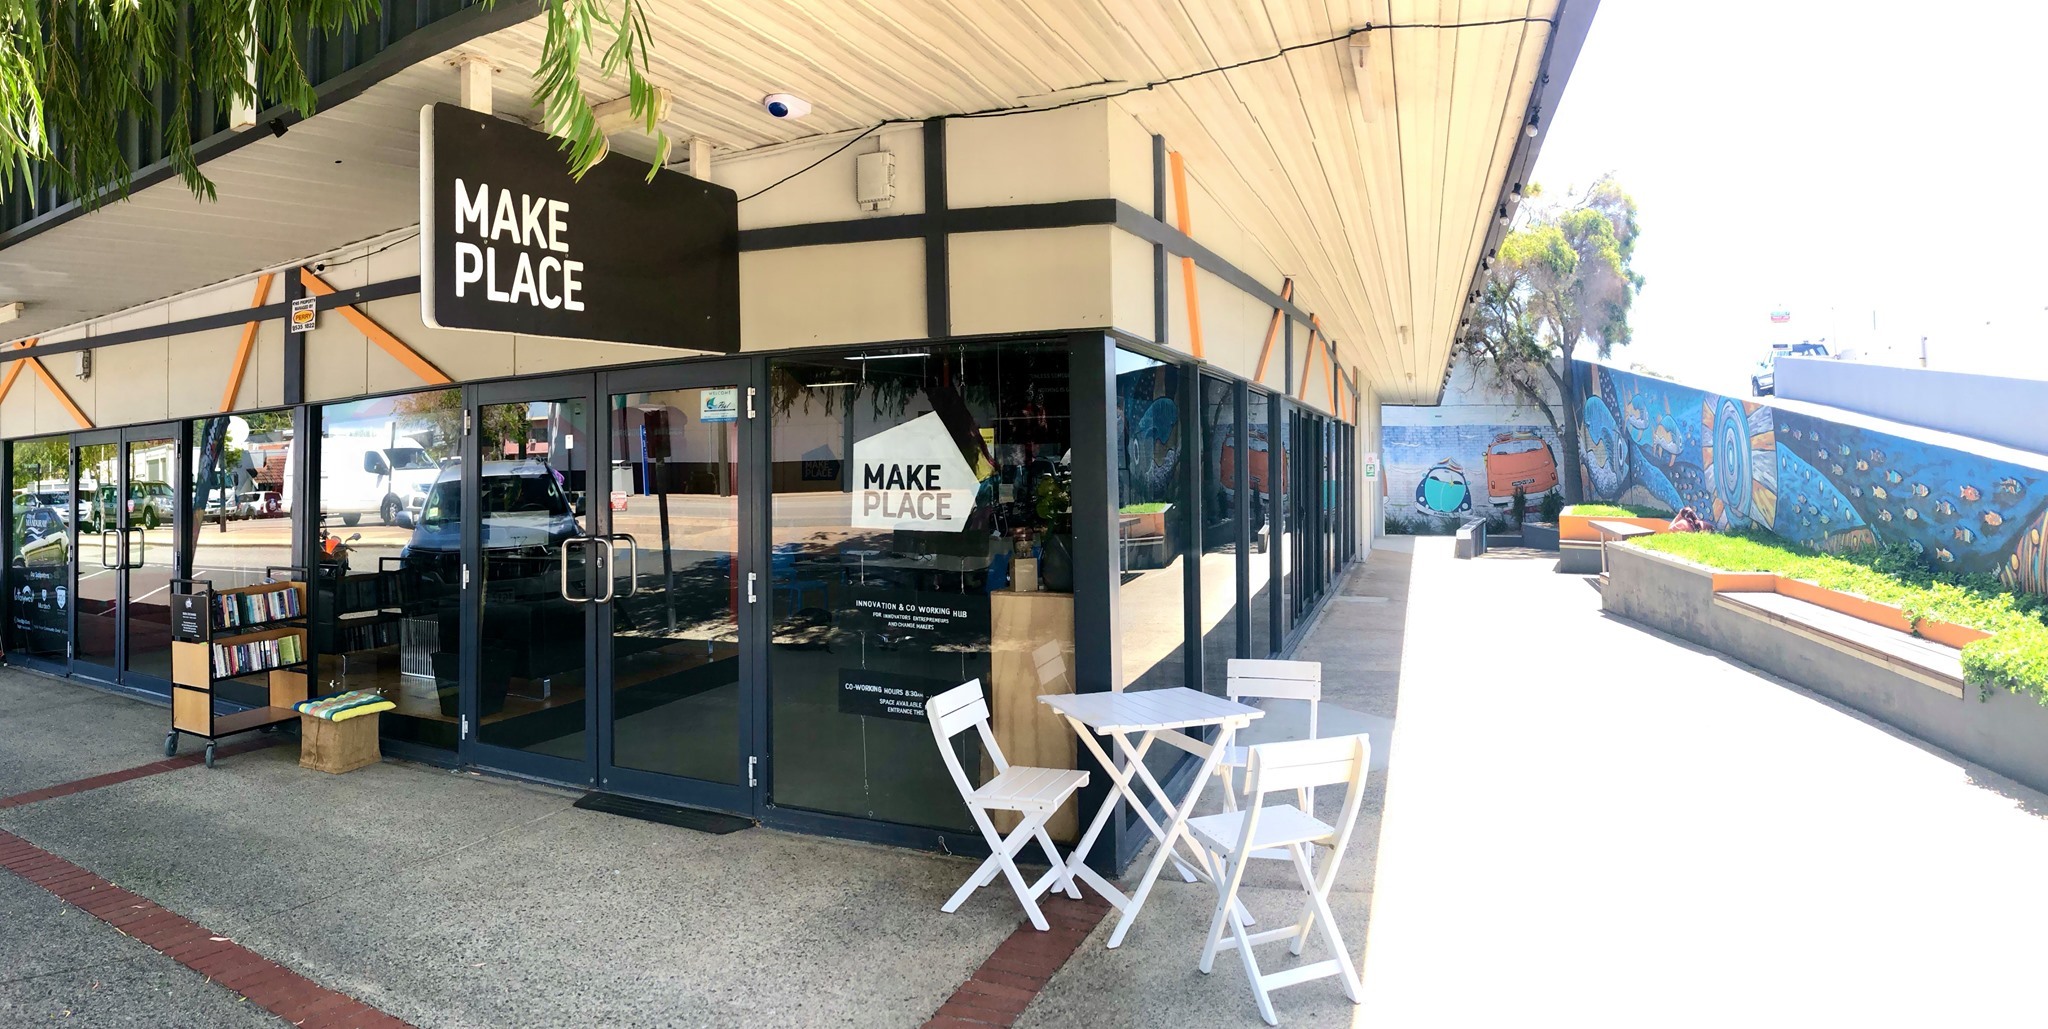 Spacecubed have partnered with Make Place to activate the Mandurah startup community